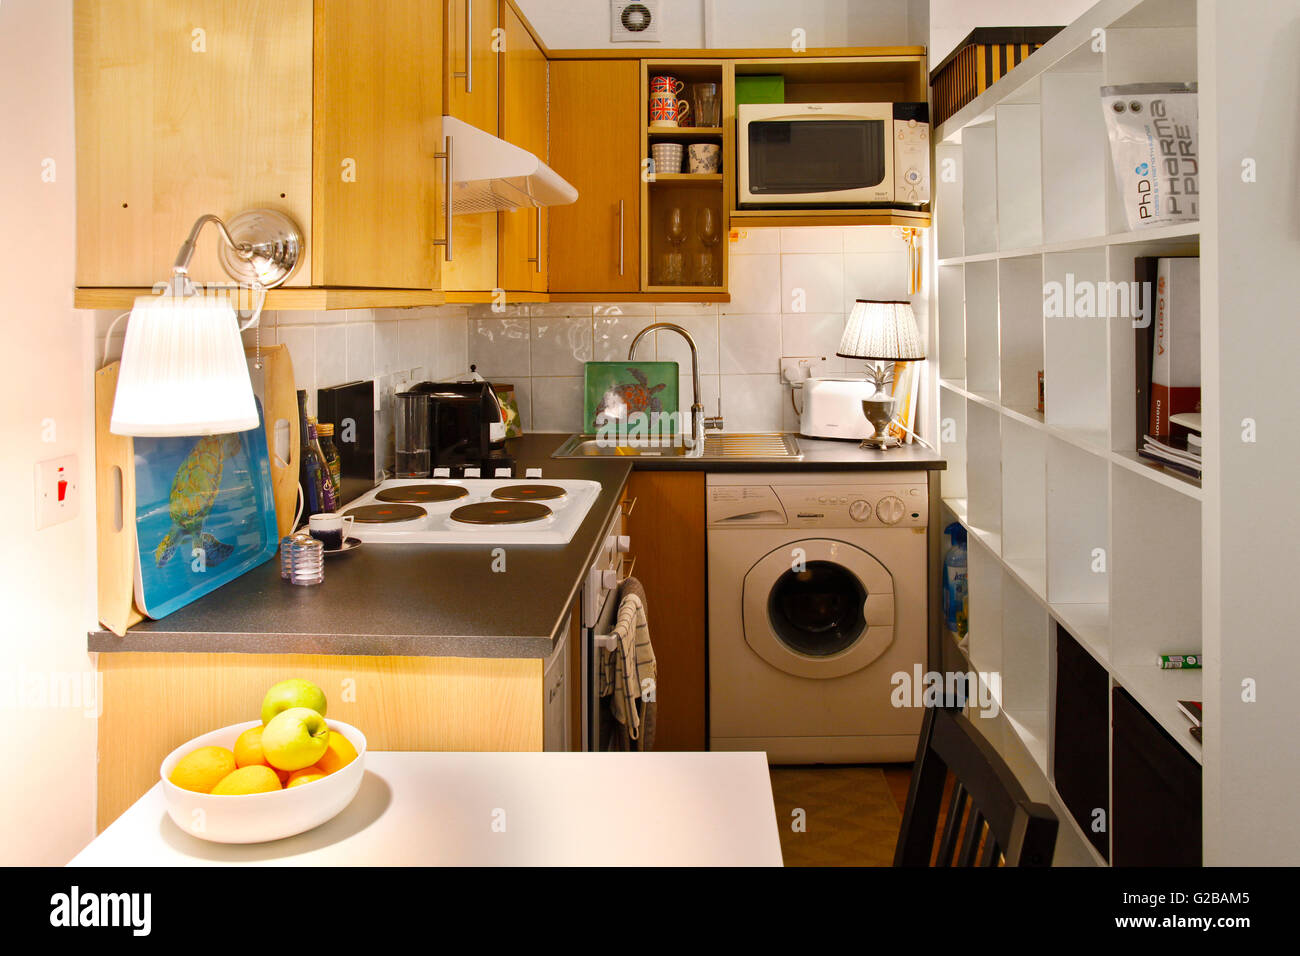 Pembridge Square, Notting Hill. Cramped traditional kitchen with washer and shelving units. Stock Photo